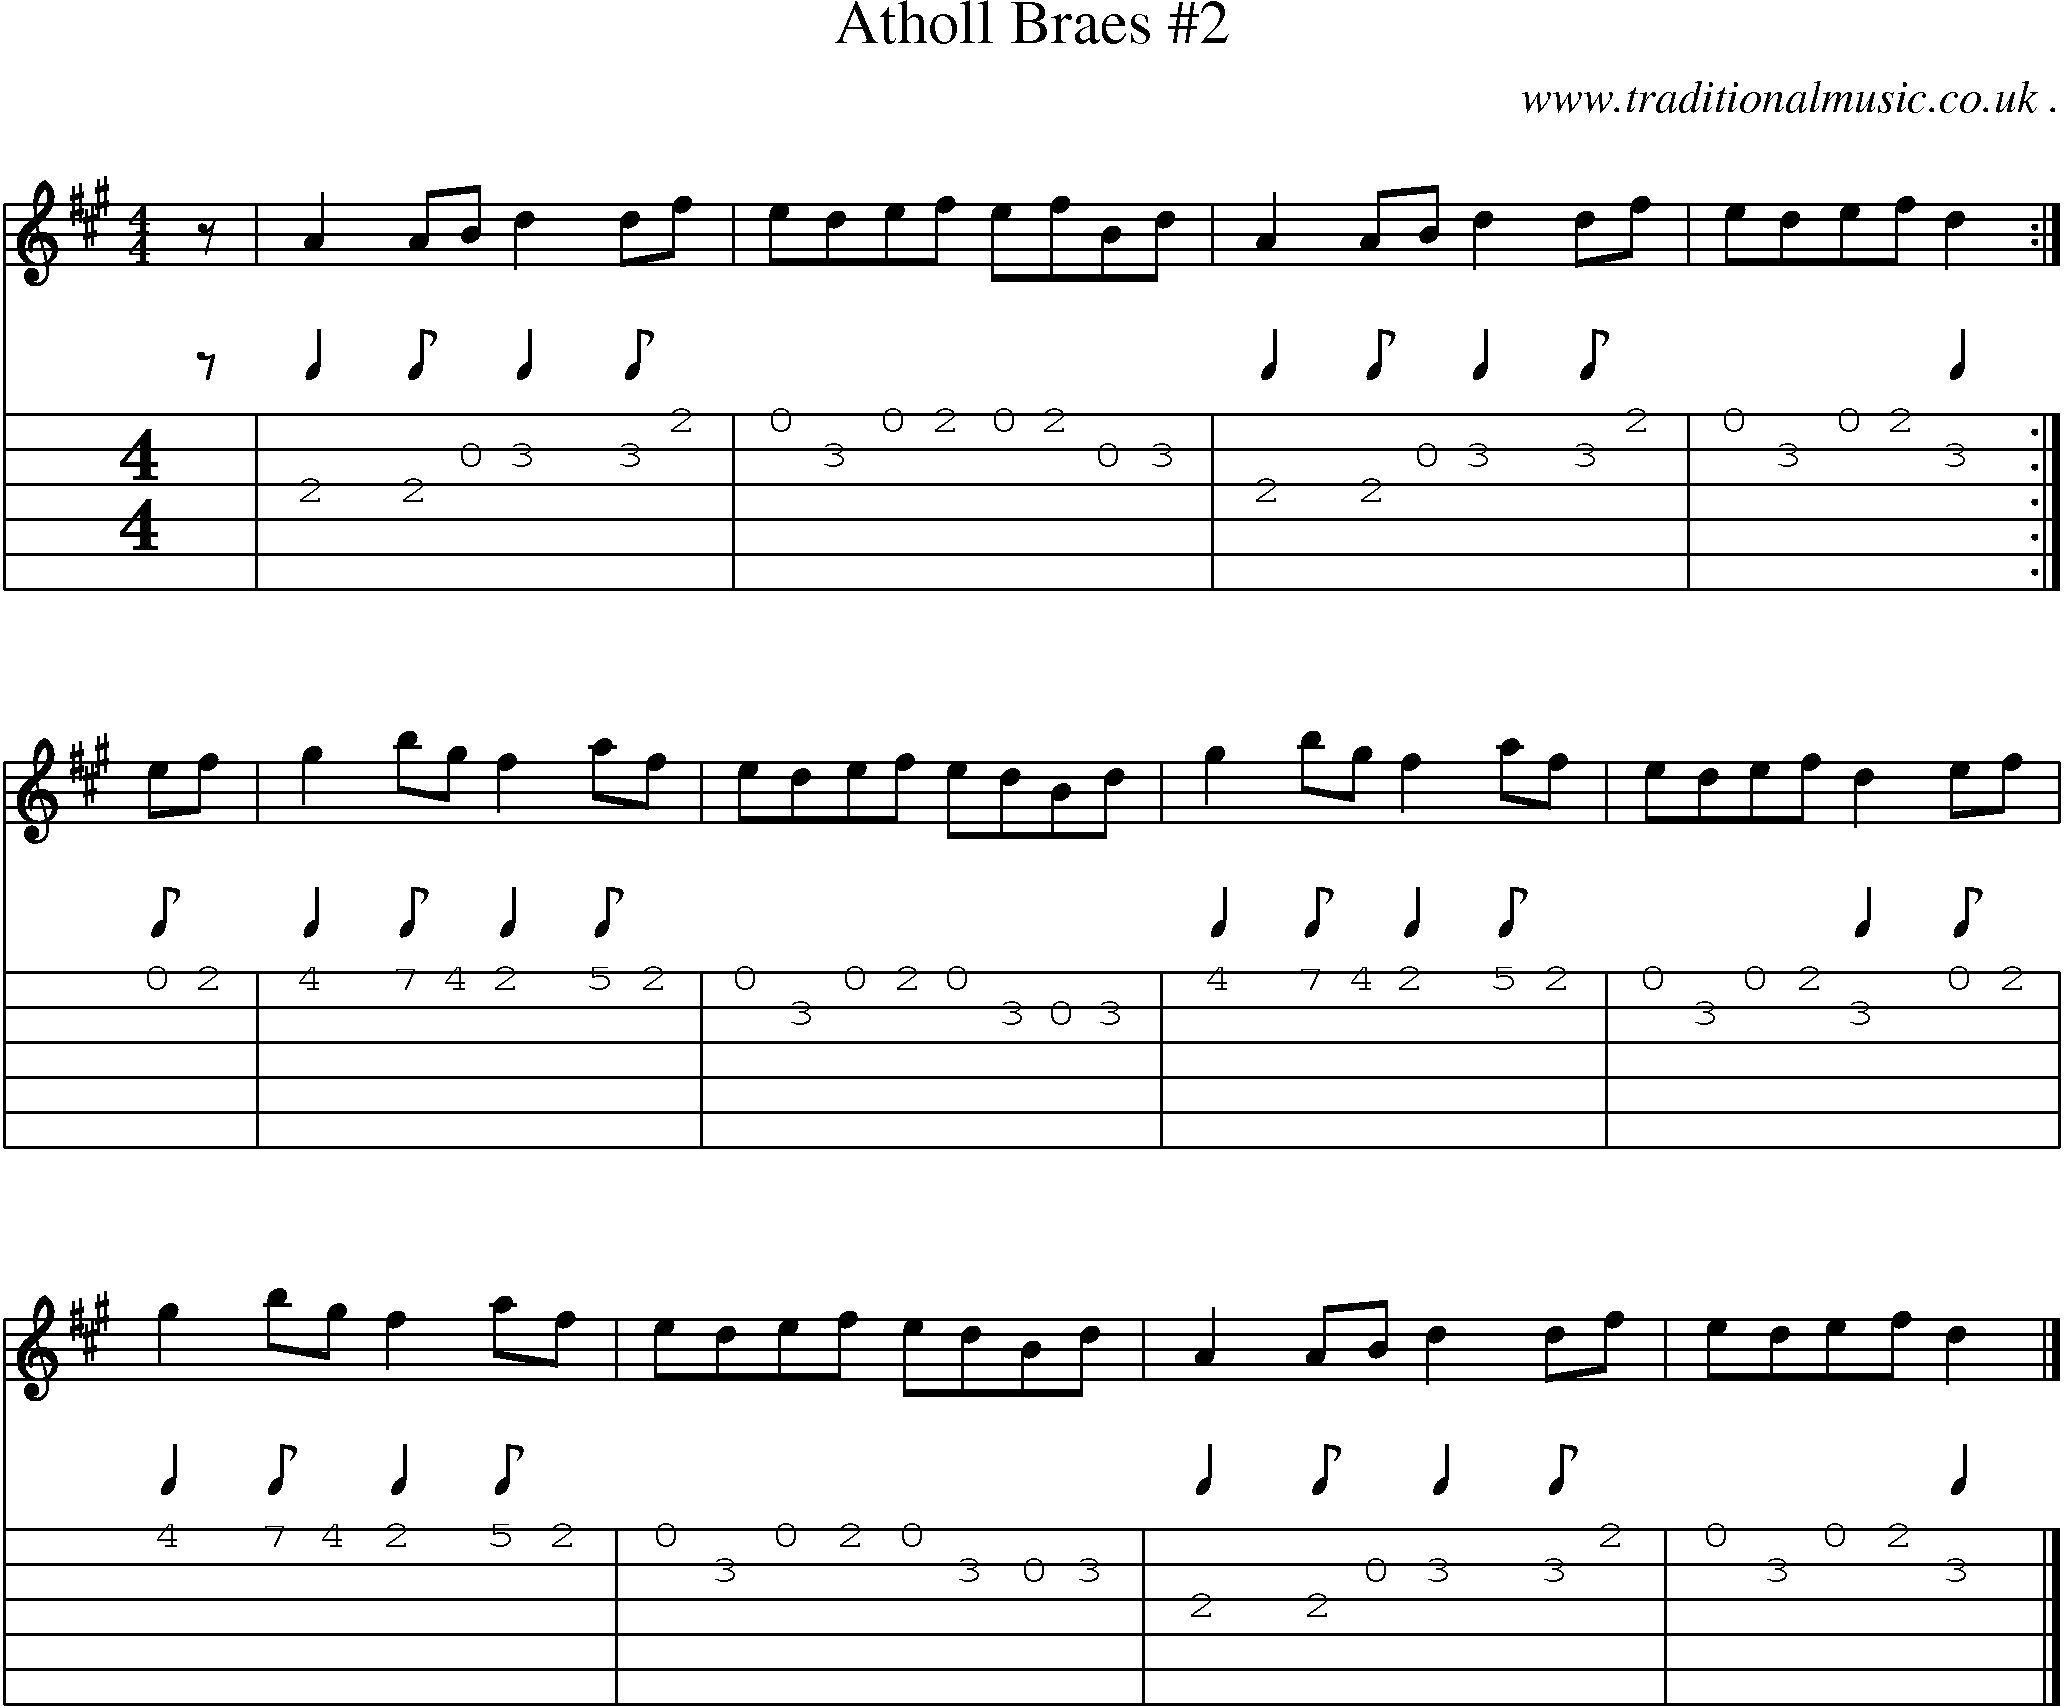 Sheet-music  score, Chords and Guitar Tabs for Atholl Braes 2